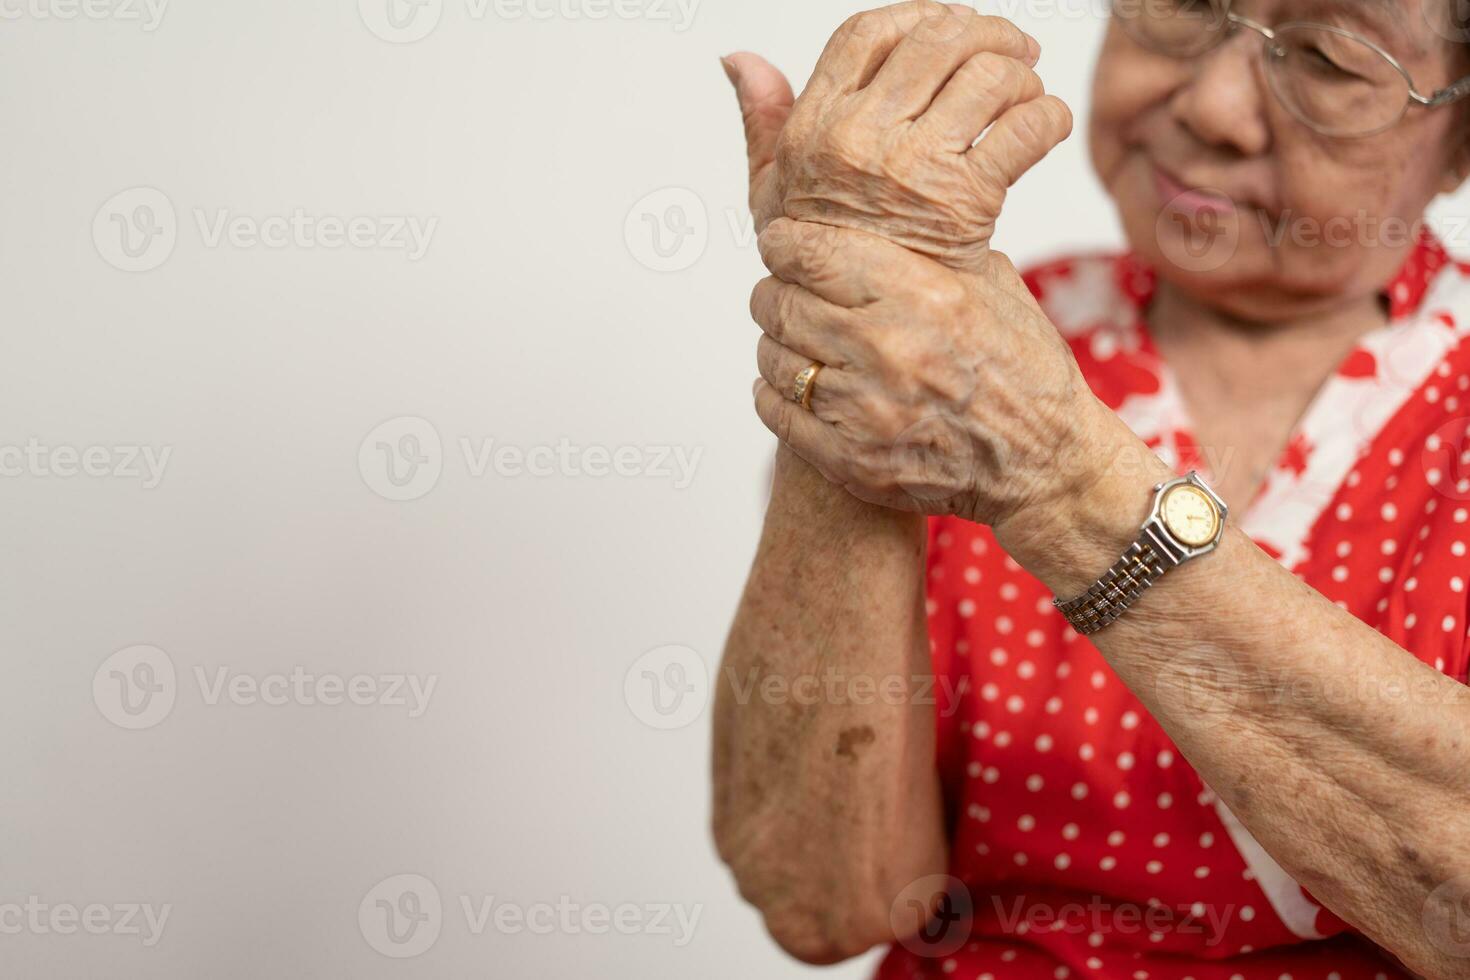 Elderly Asian woman patients suffer from numbing pain in hands from rheumatoid arthritis. Senior woman massage her hand with wrist pain. Concept of joint pain, rheumatoid arthritis, and hand problems. photo